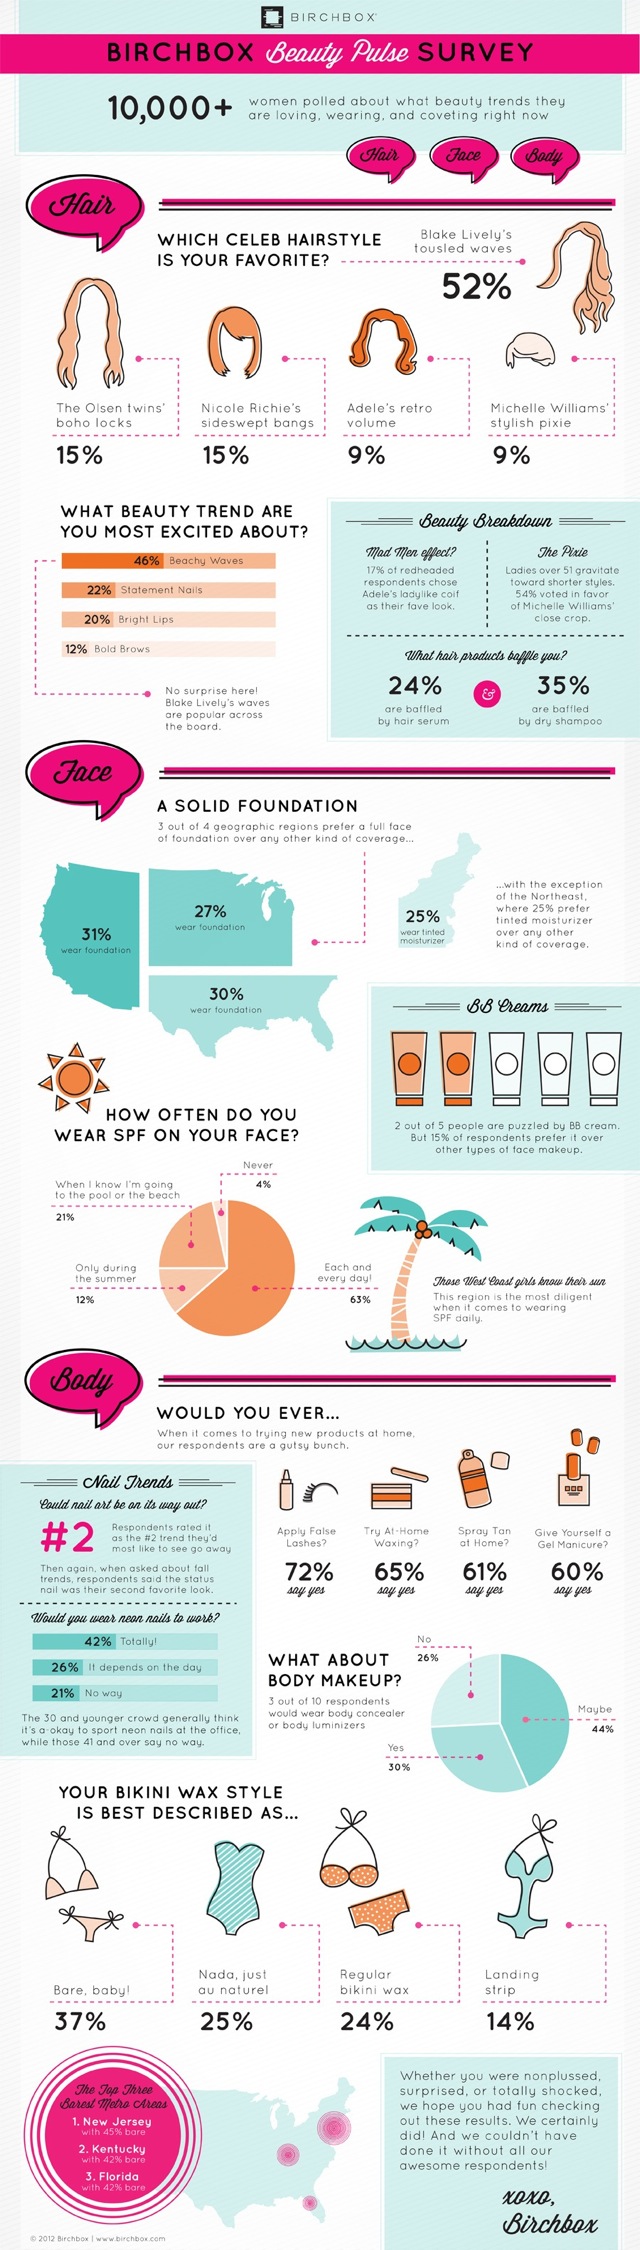 bbpulse infographic final Infographic: Find Out How Women Really Feel About Beauty Trends